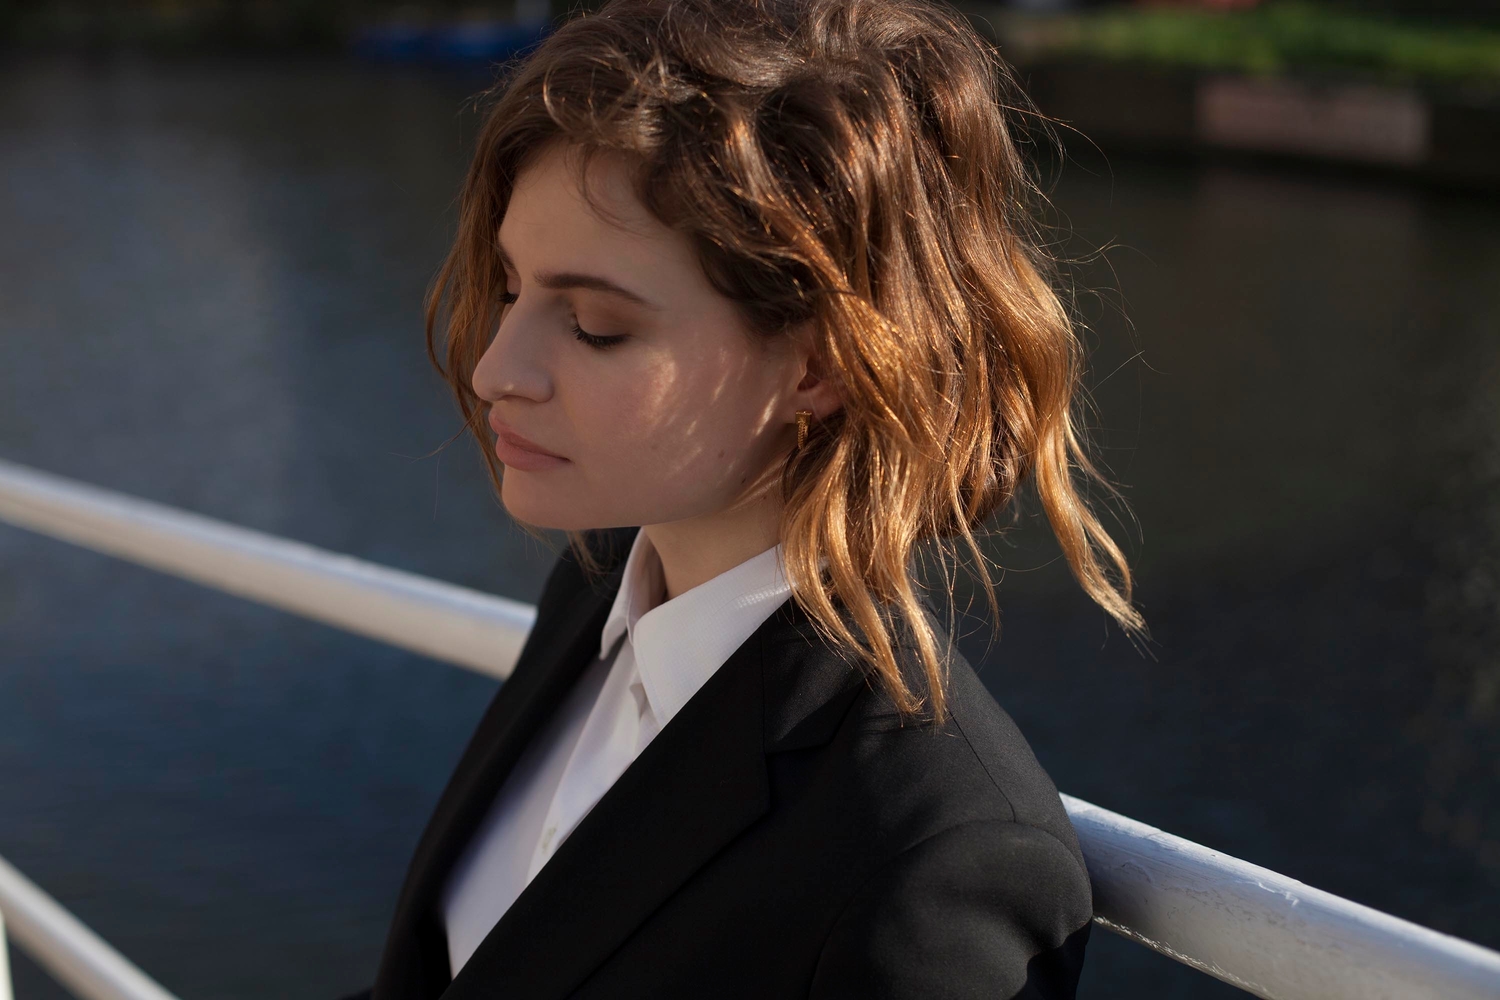 Christine & the Queens, Stormzy and Daughter win AIM Awards 2016